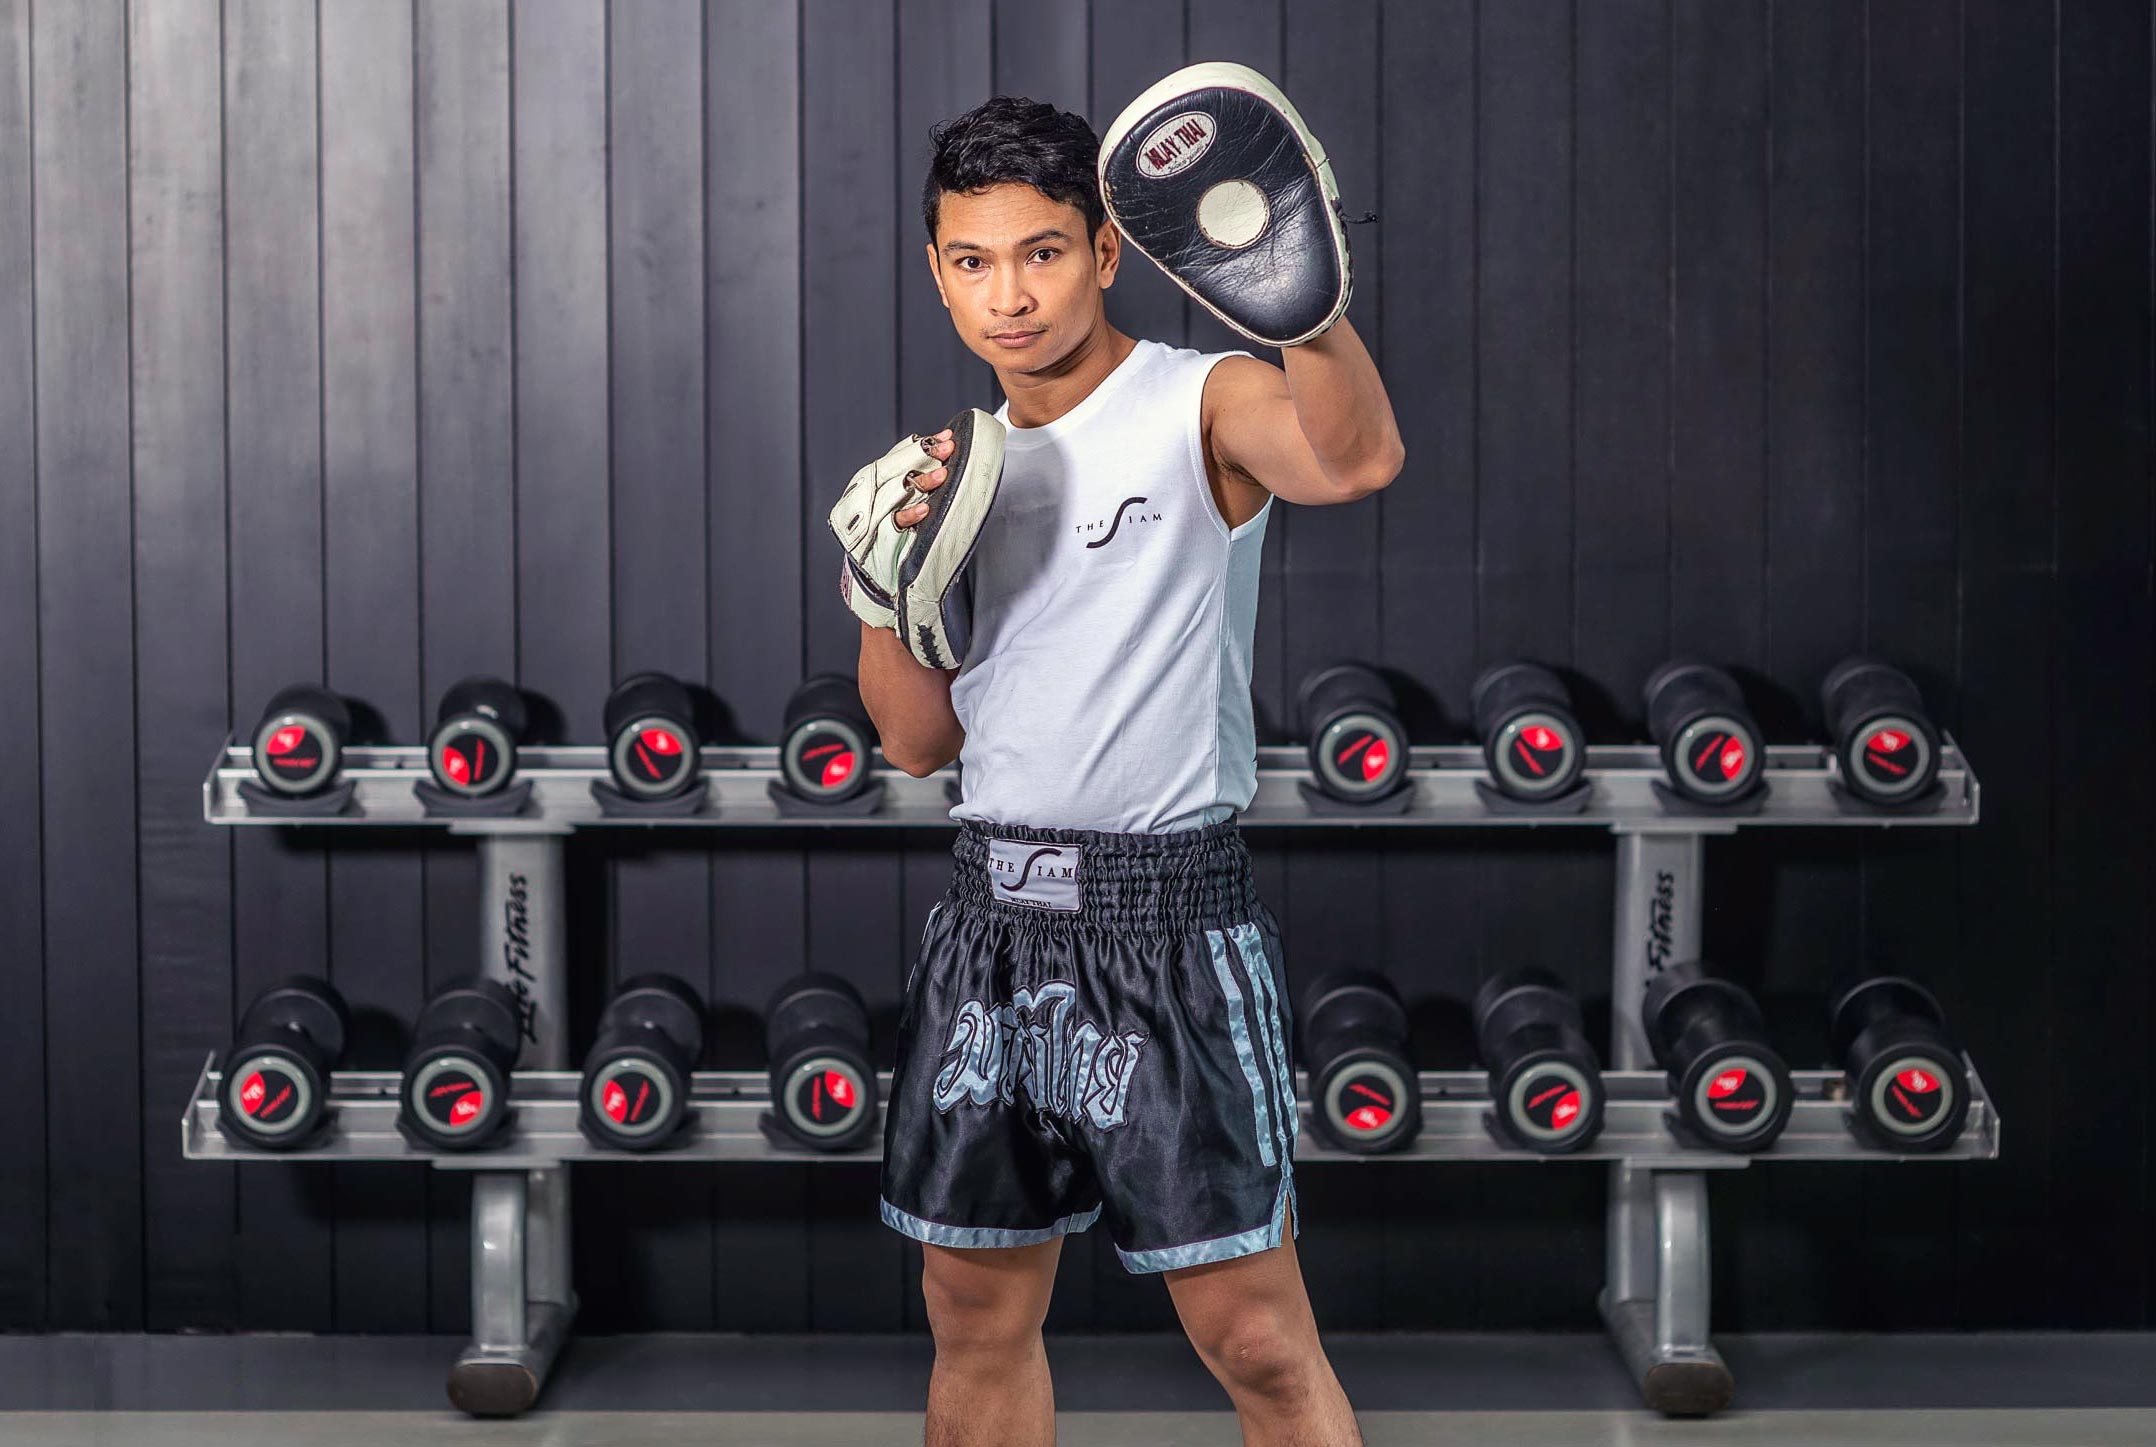 A boxing coach wearing sparring pads on his hands teaches Thai boxing for a hotel brand in Bangkok, Thailand. In the background, there is a set of dumbbells. Captured by Wright Content, a sports photographer in London.